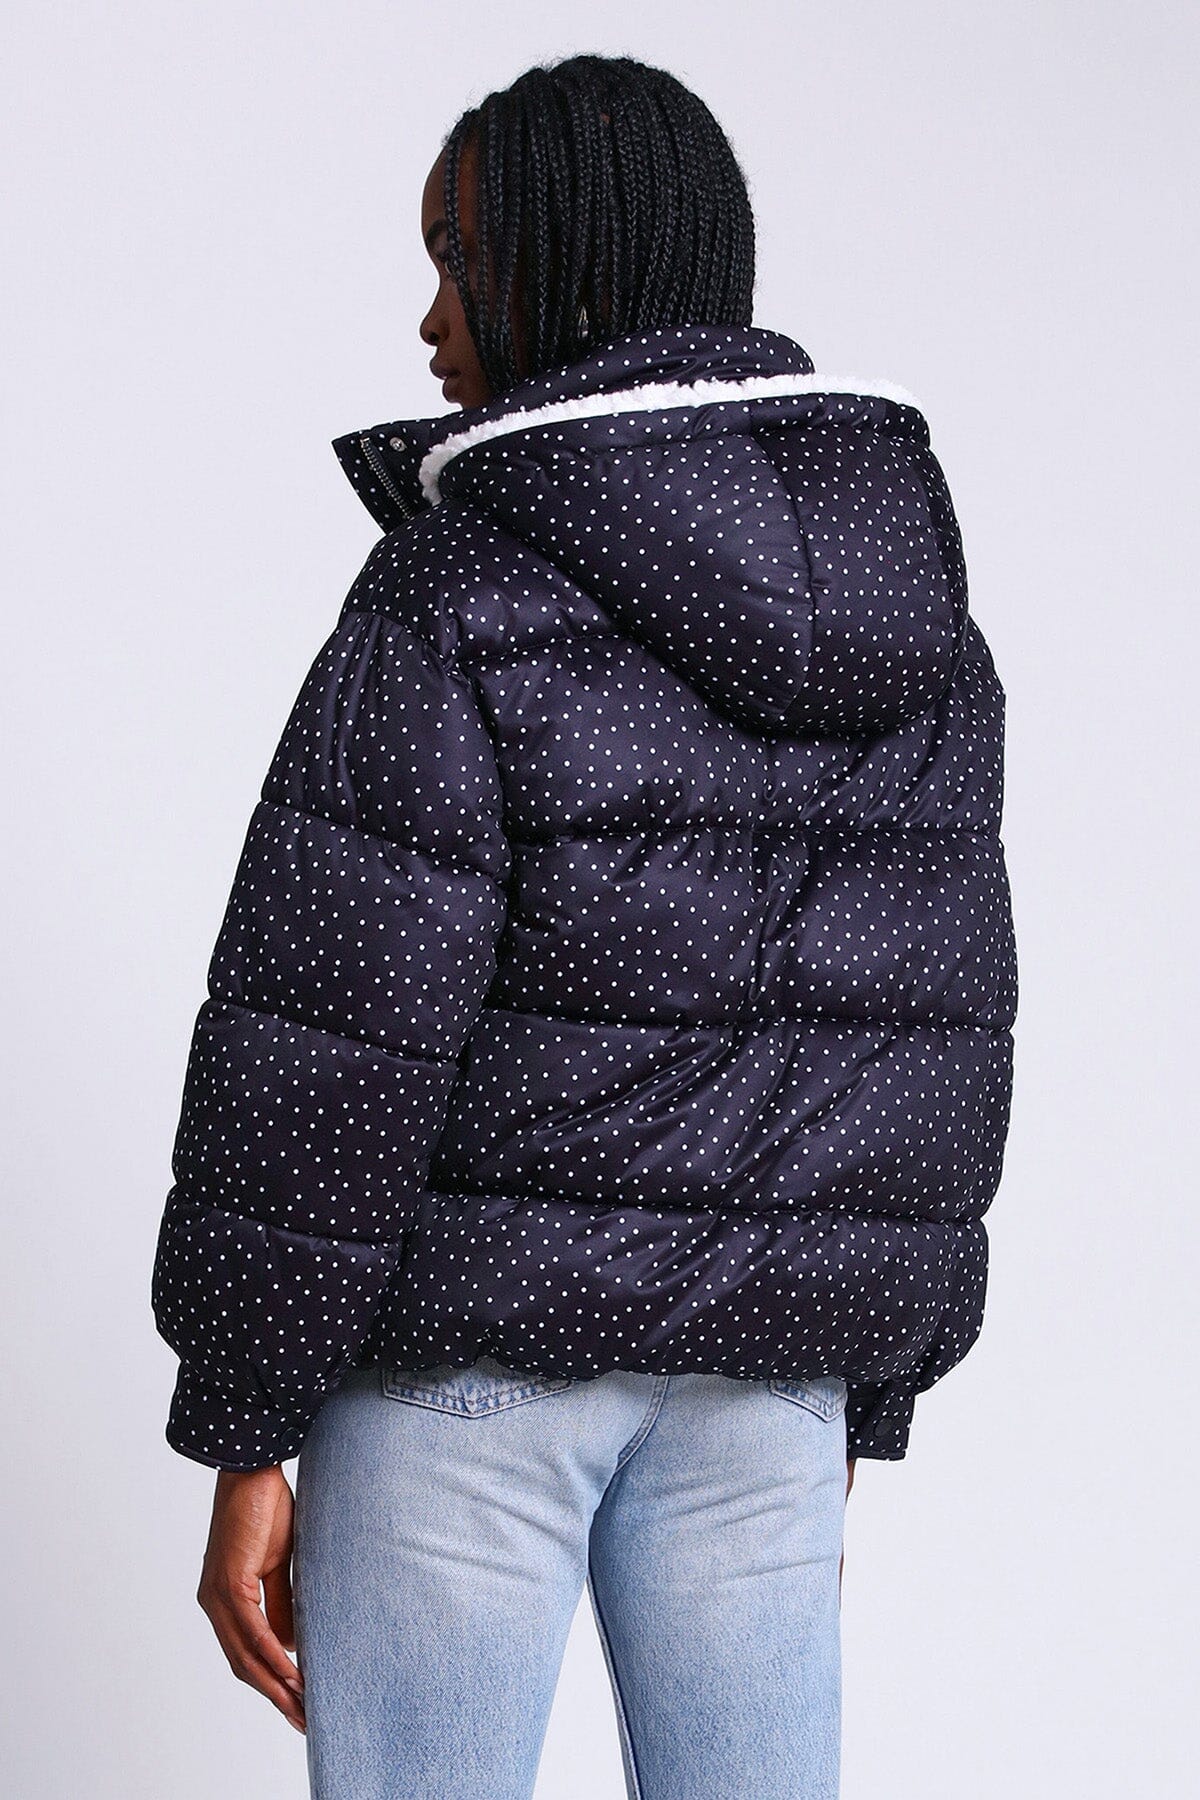 printed thermal puff hooded puffer jacket coat black and white polka dots - women's figure flattering night out outerewear